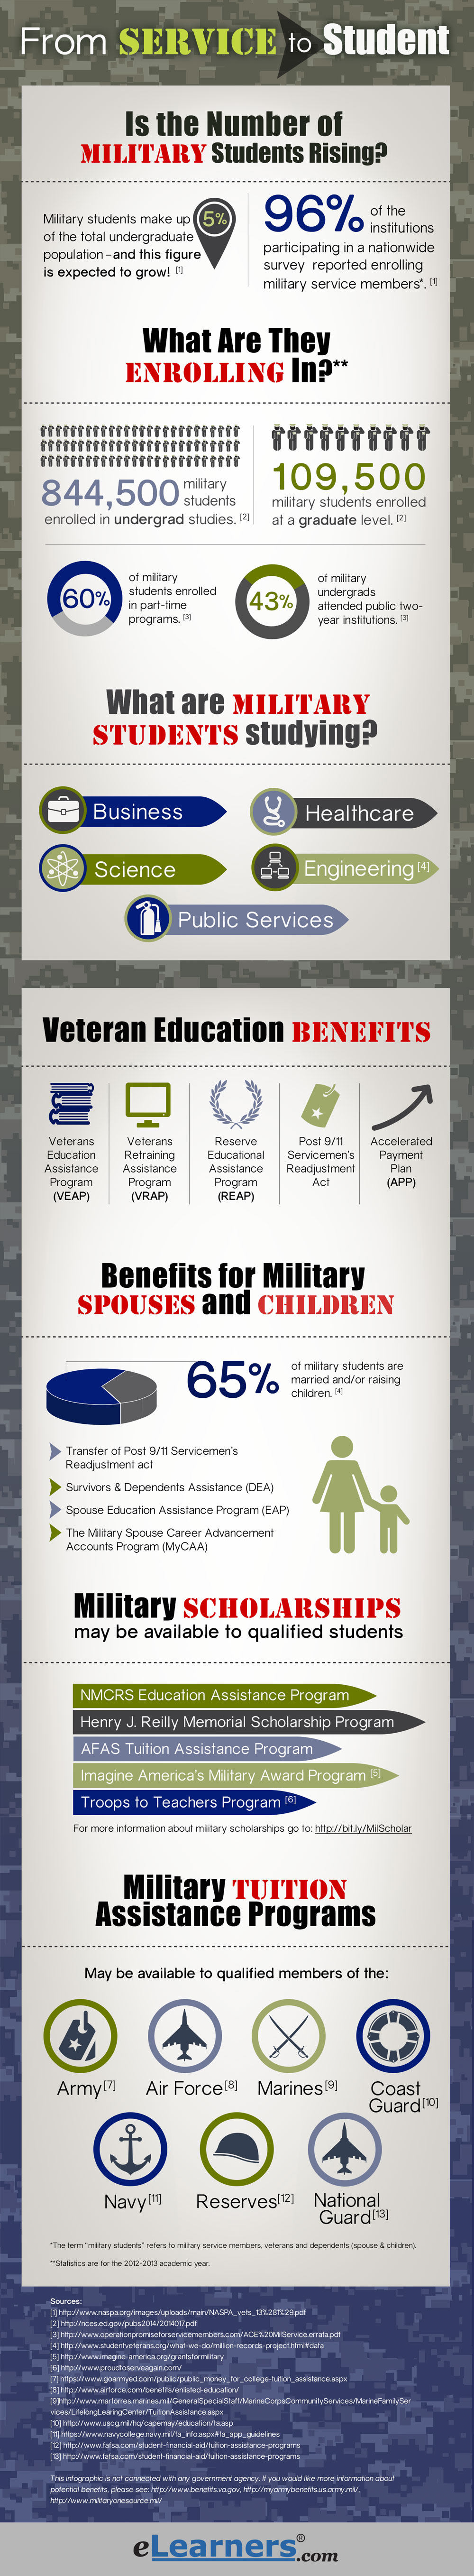 military students infographic